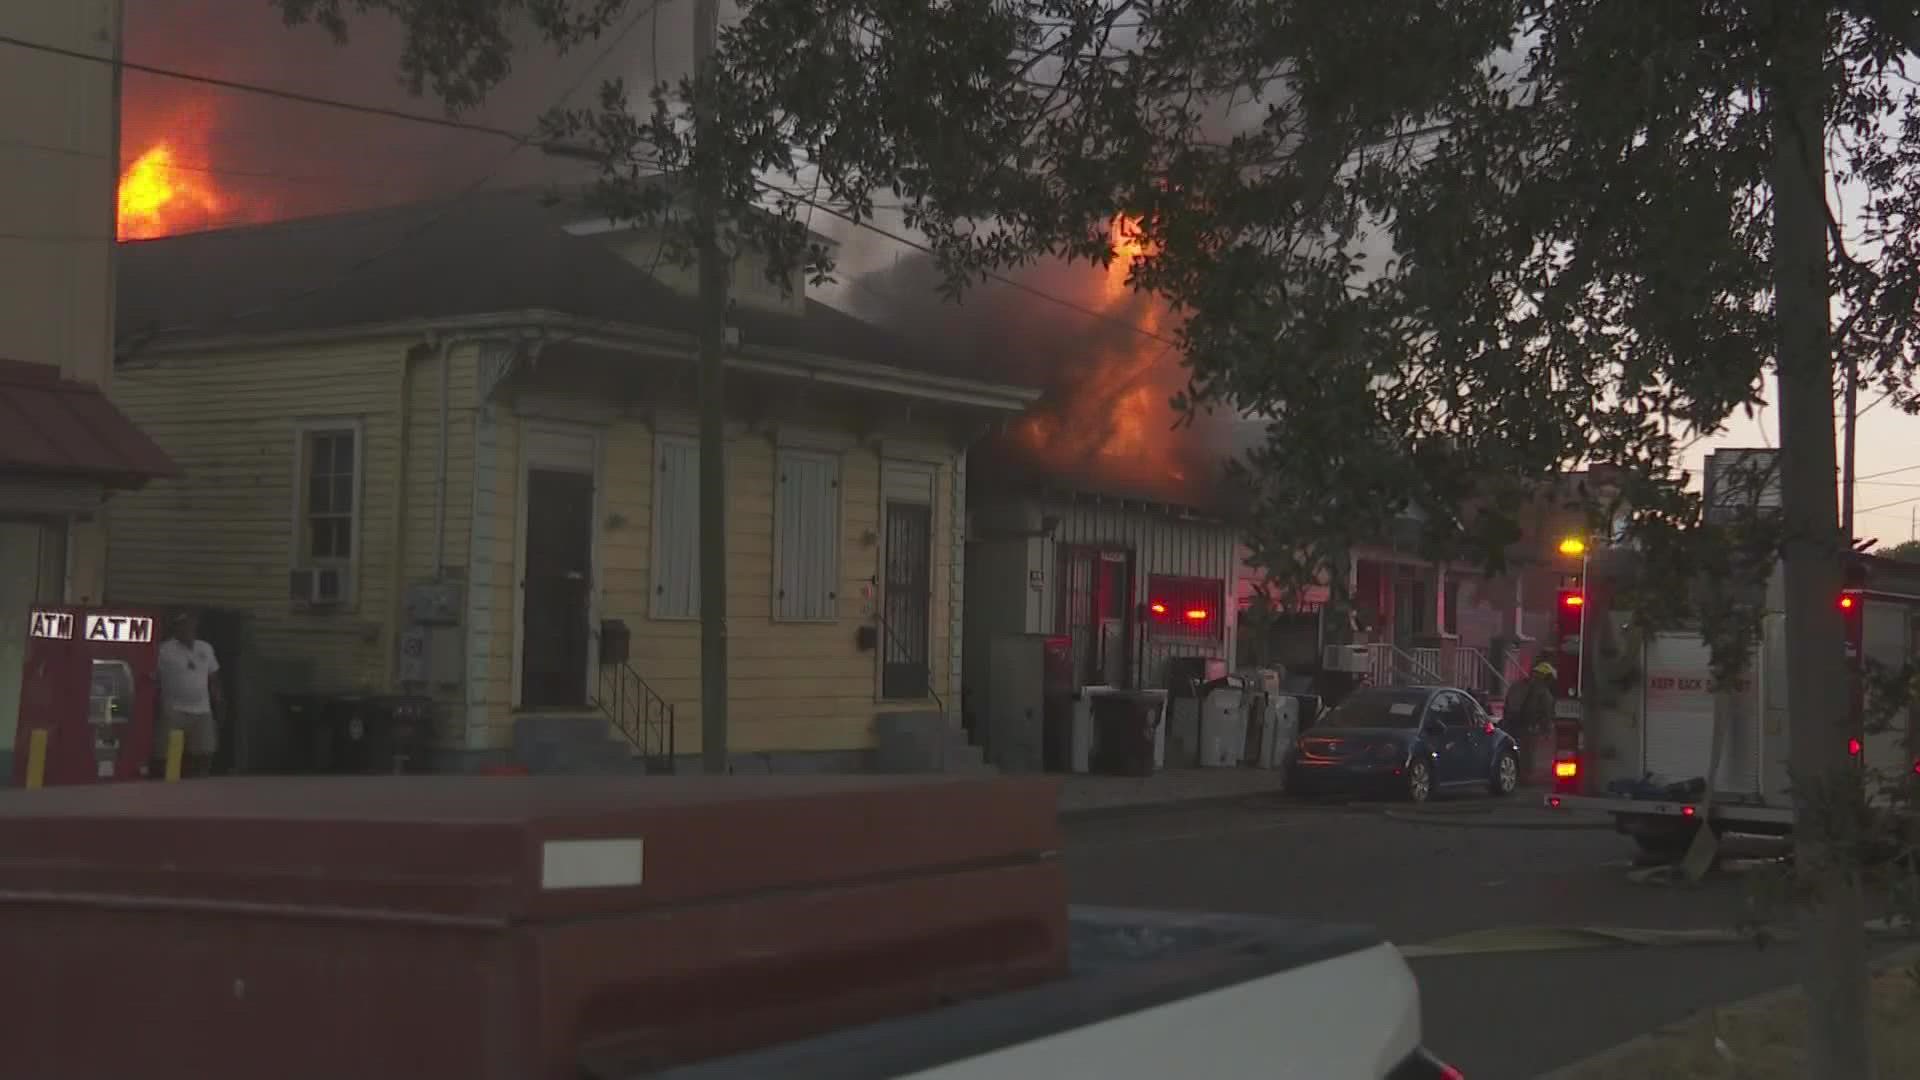 The New Orleans Fire Department responded to the three-alarm fire along the 1600 block of Franklin Ave. It took two hours to get the fire under control.